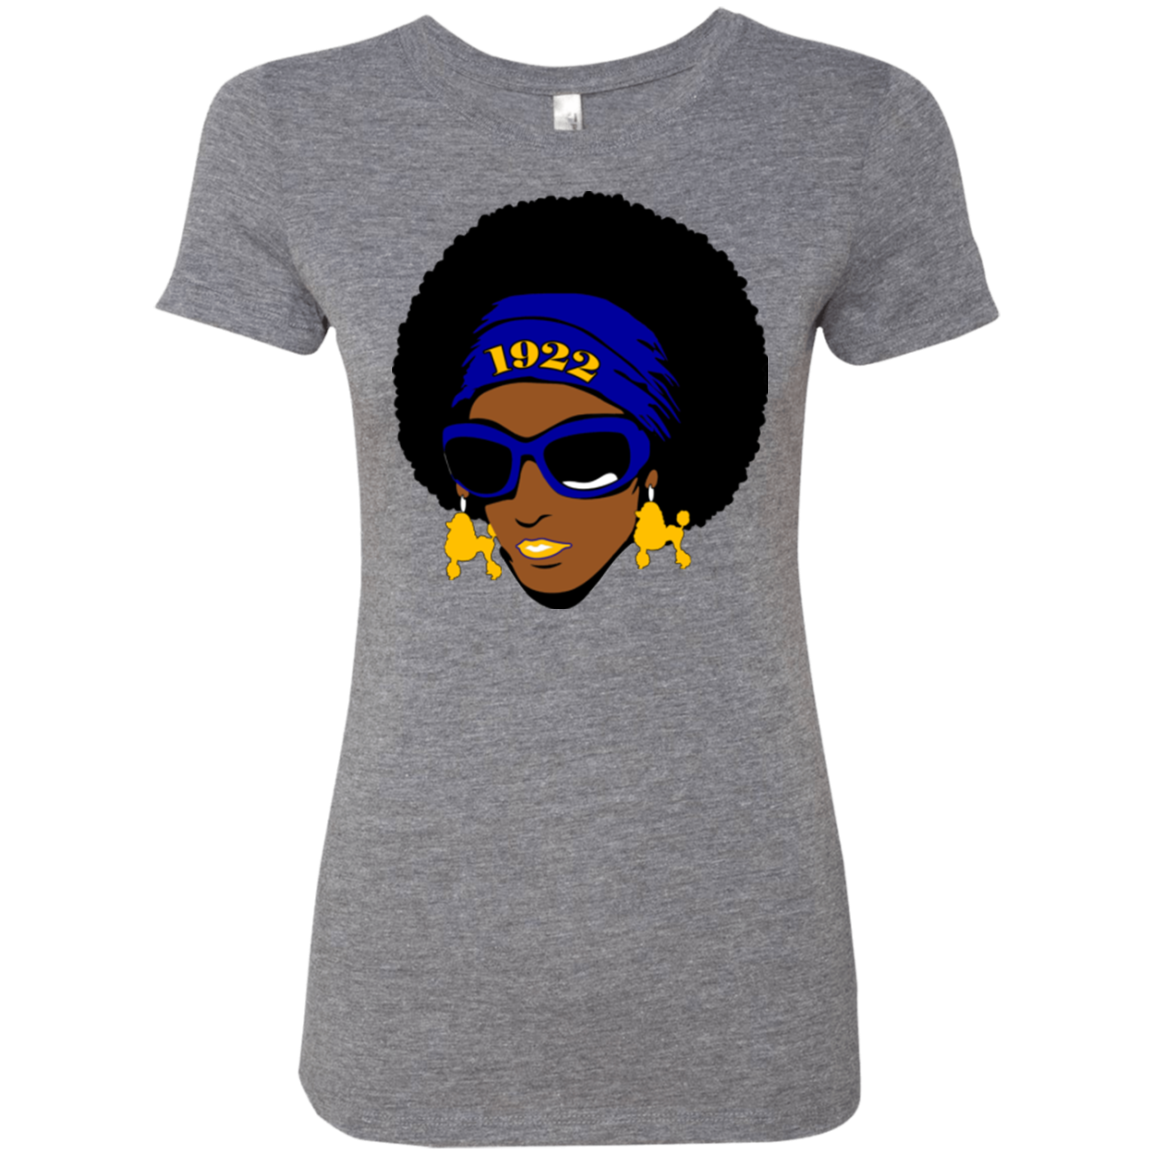 SGRHO Fitted Tri-Blend